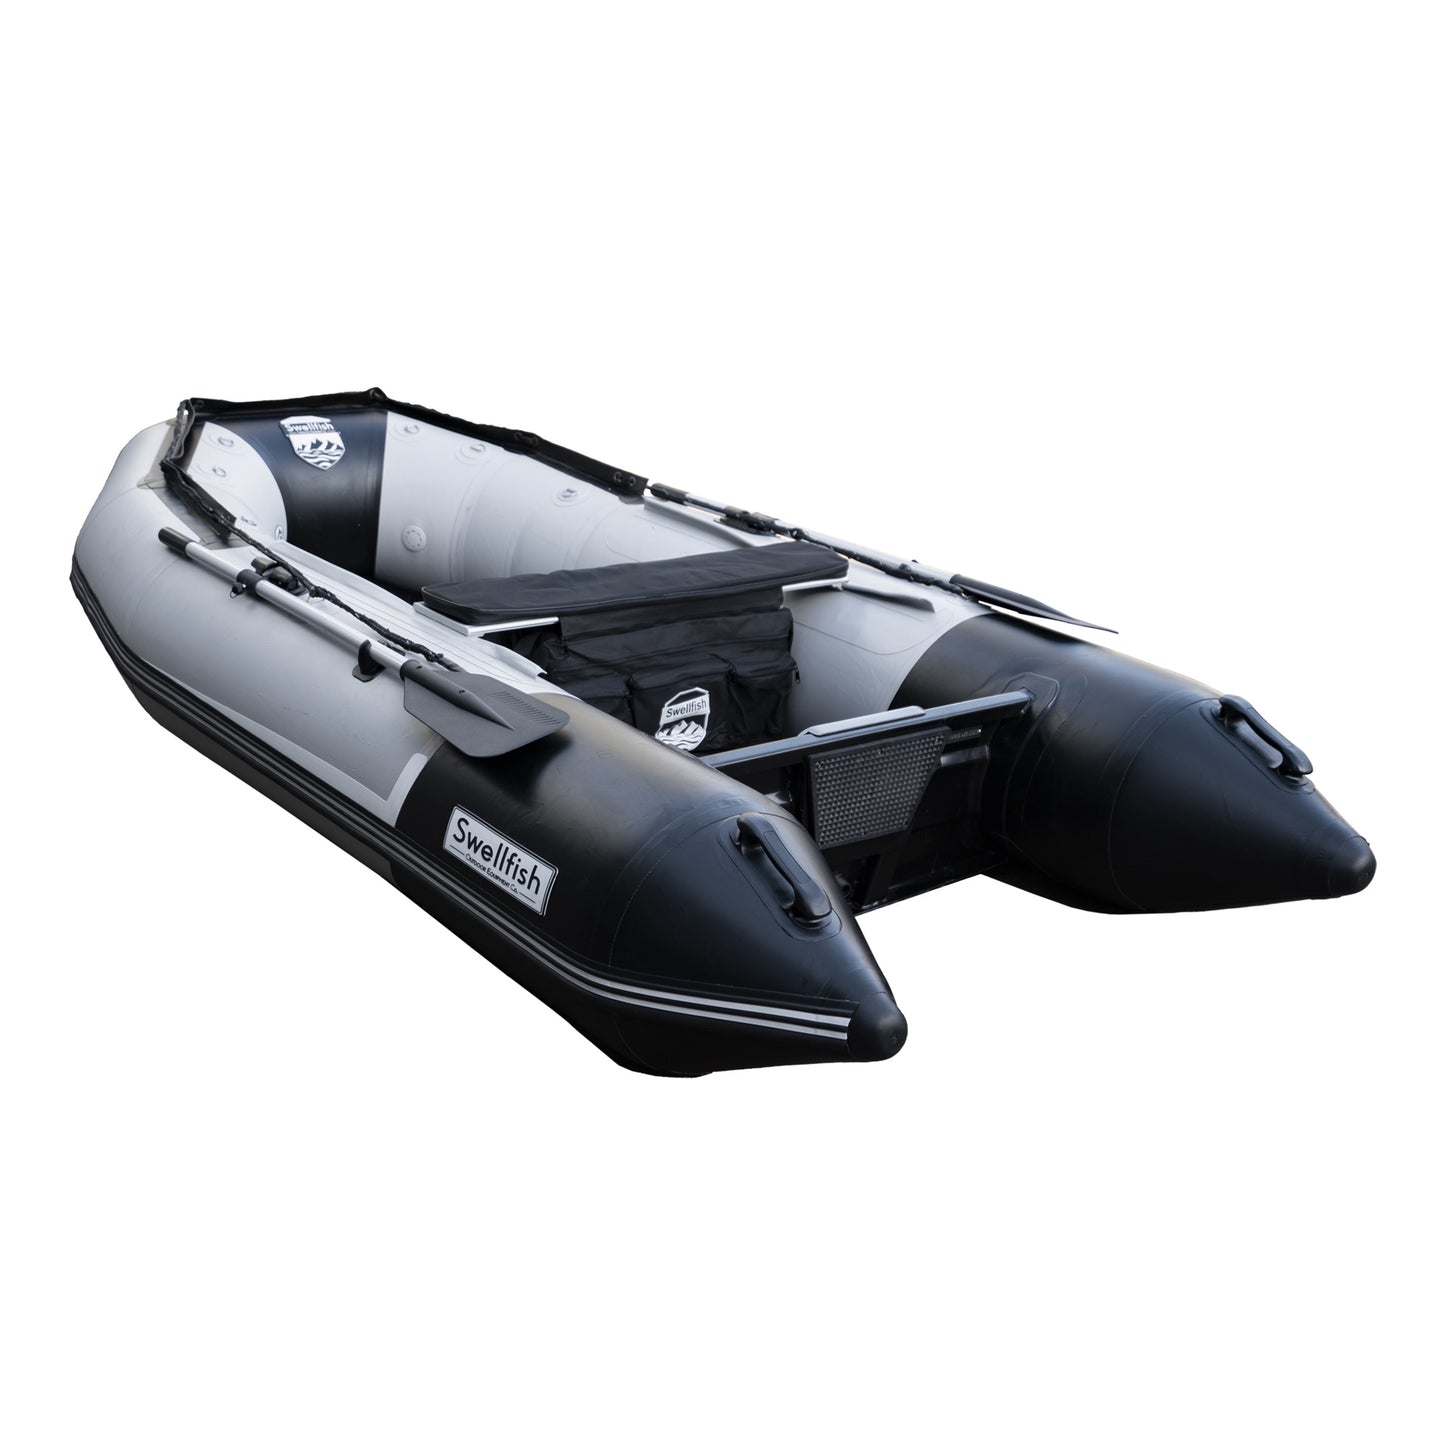 FS Ultralight Inflatable Boat 250